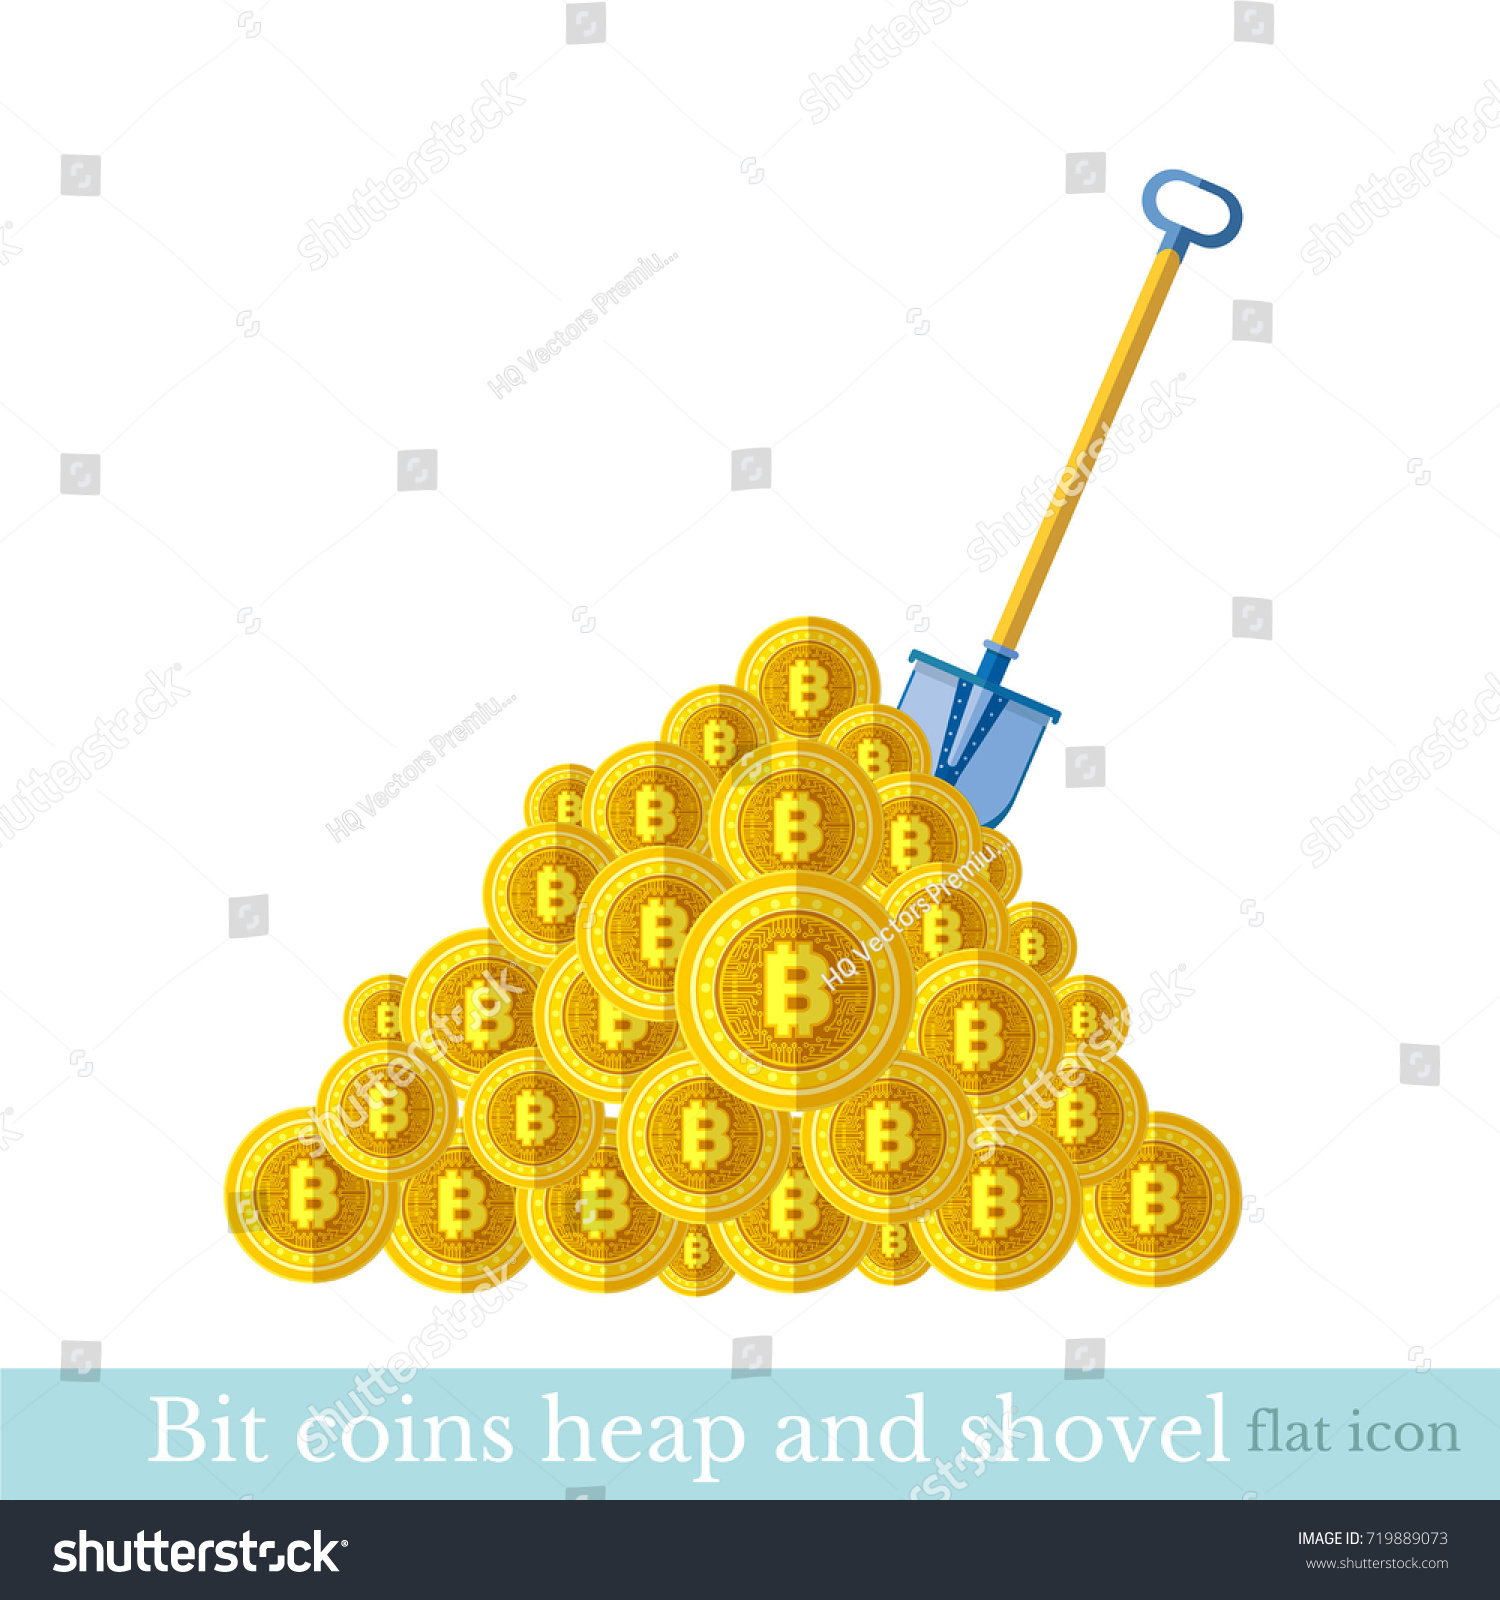 SVG of Flat icon with shovel with heap of bit coins. Mining bit coin business illustration isolated on white svg